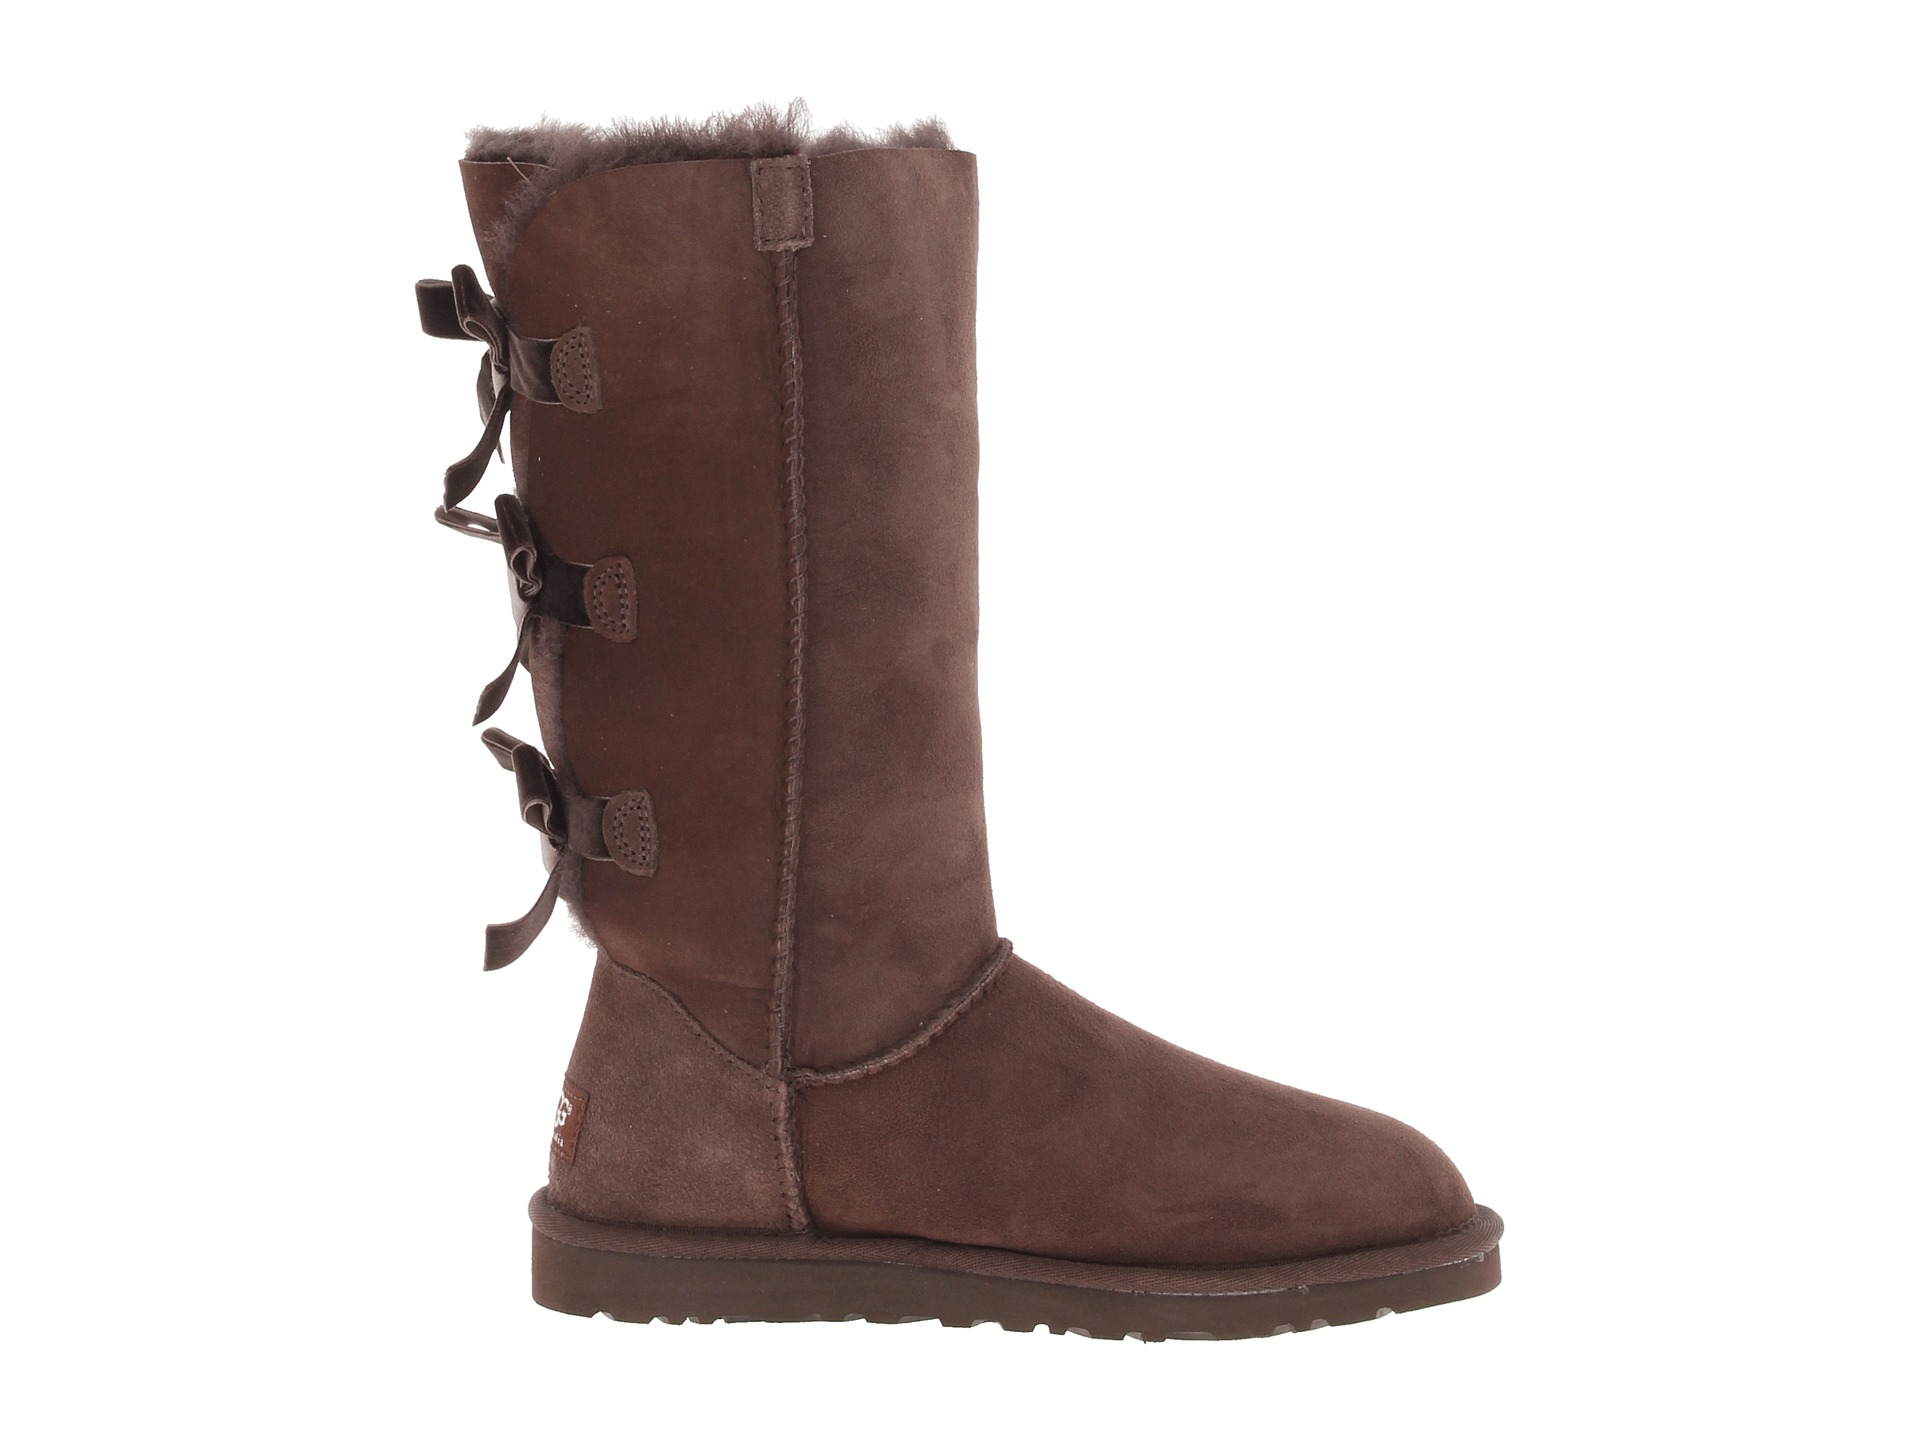 Ugg Bailey Bow Tall Boot Zappos Exclusive | Shipped Free at Zappos